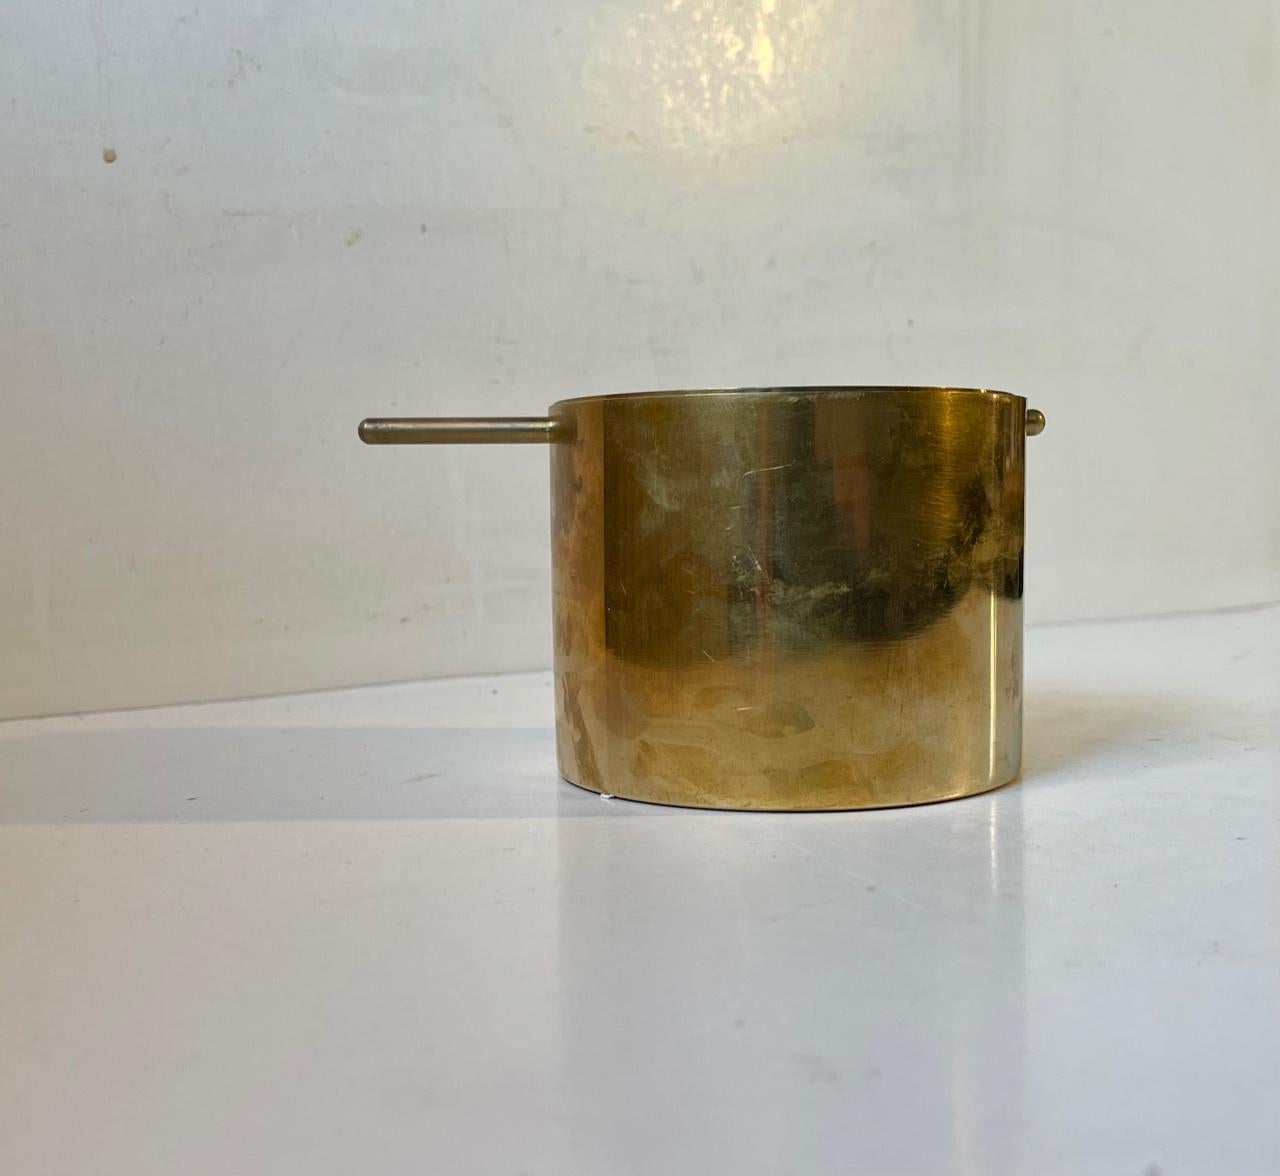 Large Brass Ashtray Cylinda-Line by Arne Jacobsen for Stelton, 1960s For Sale 1